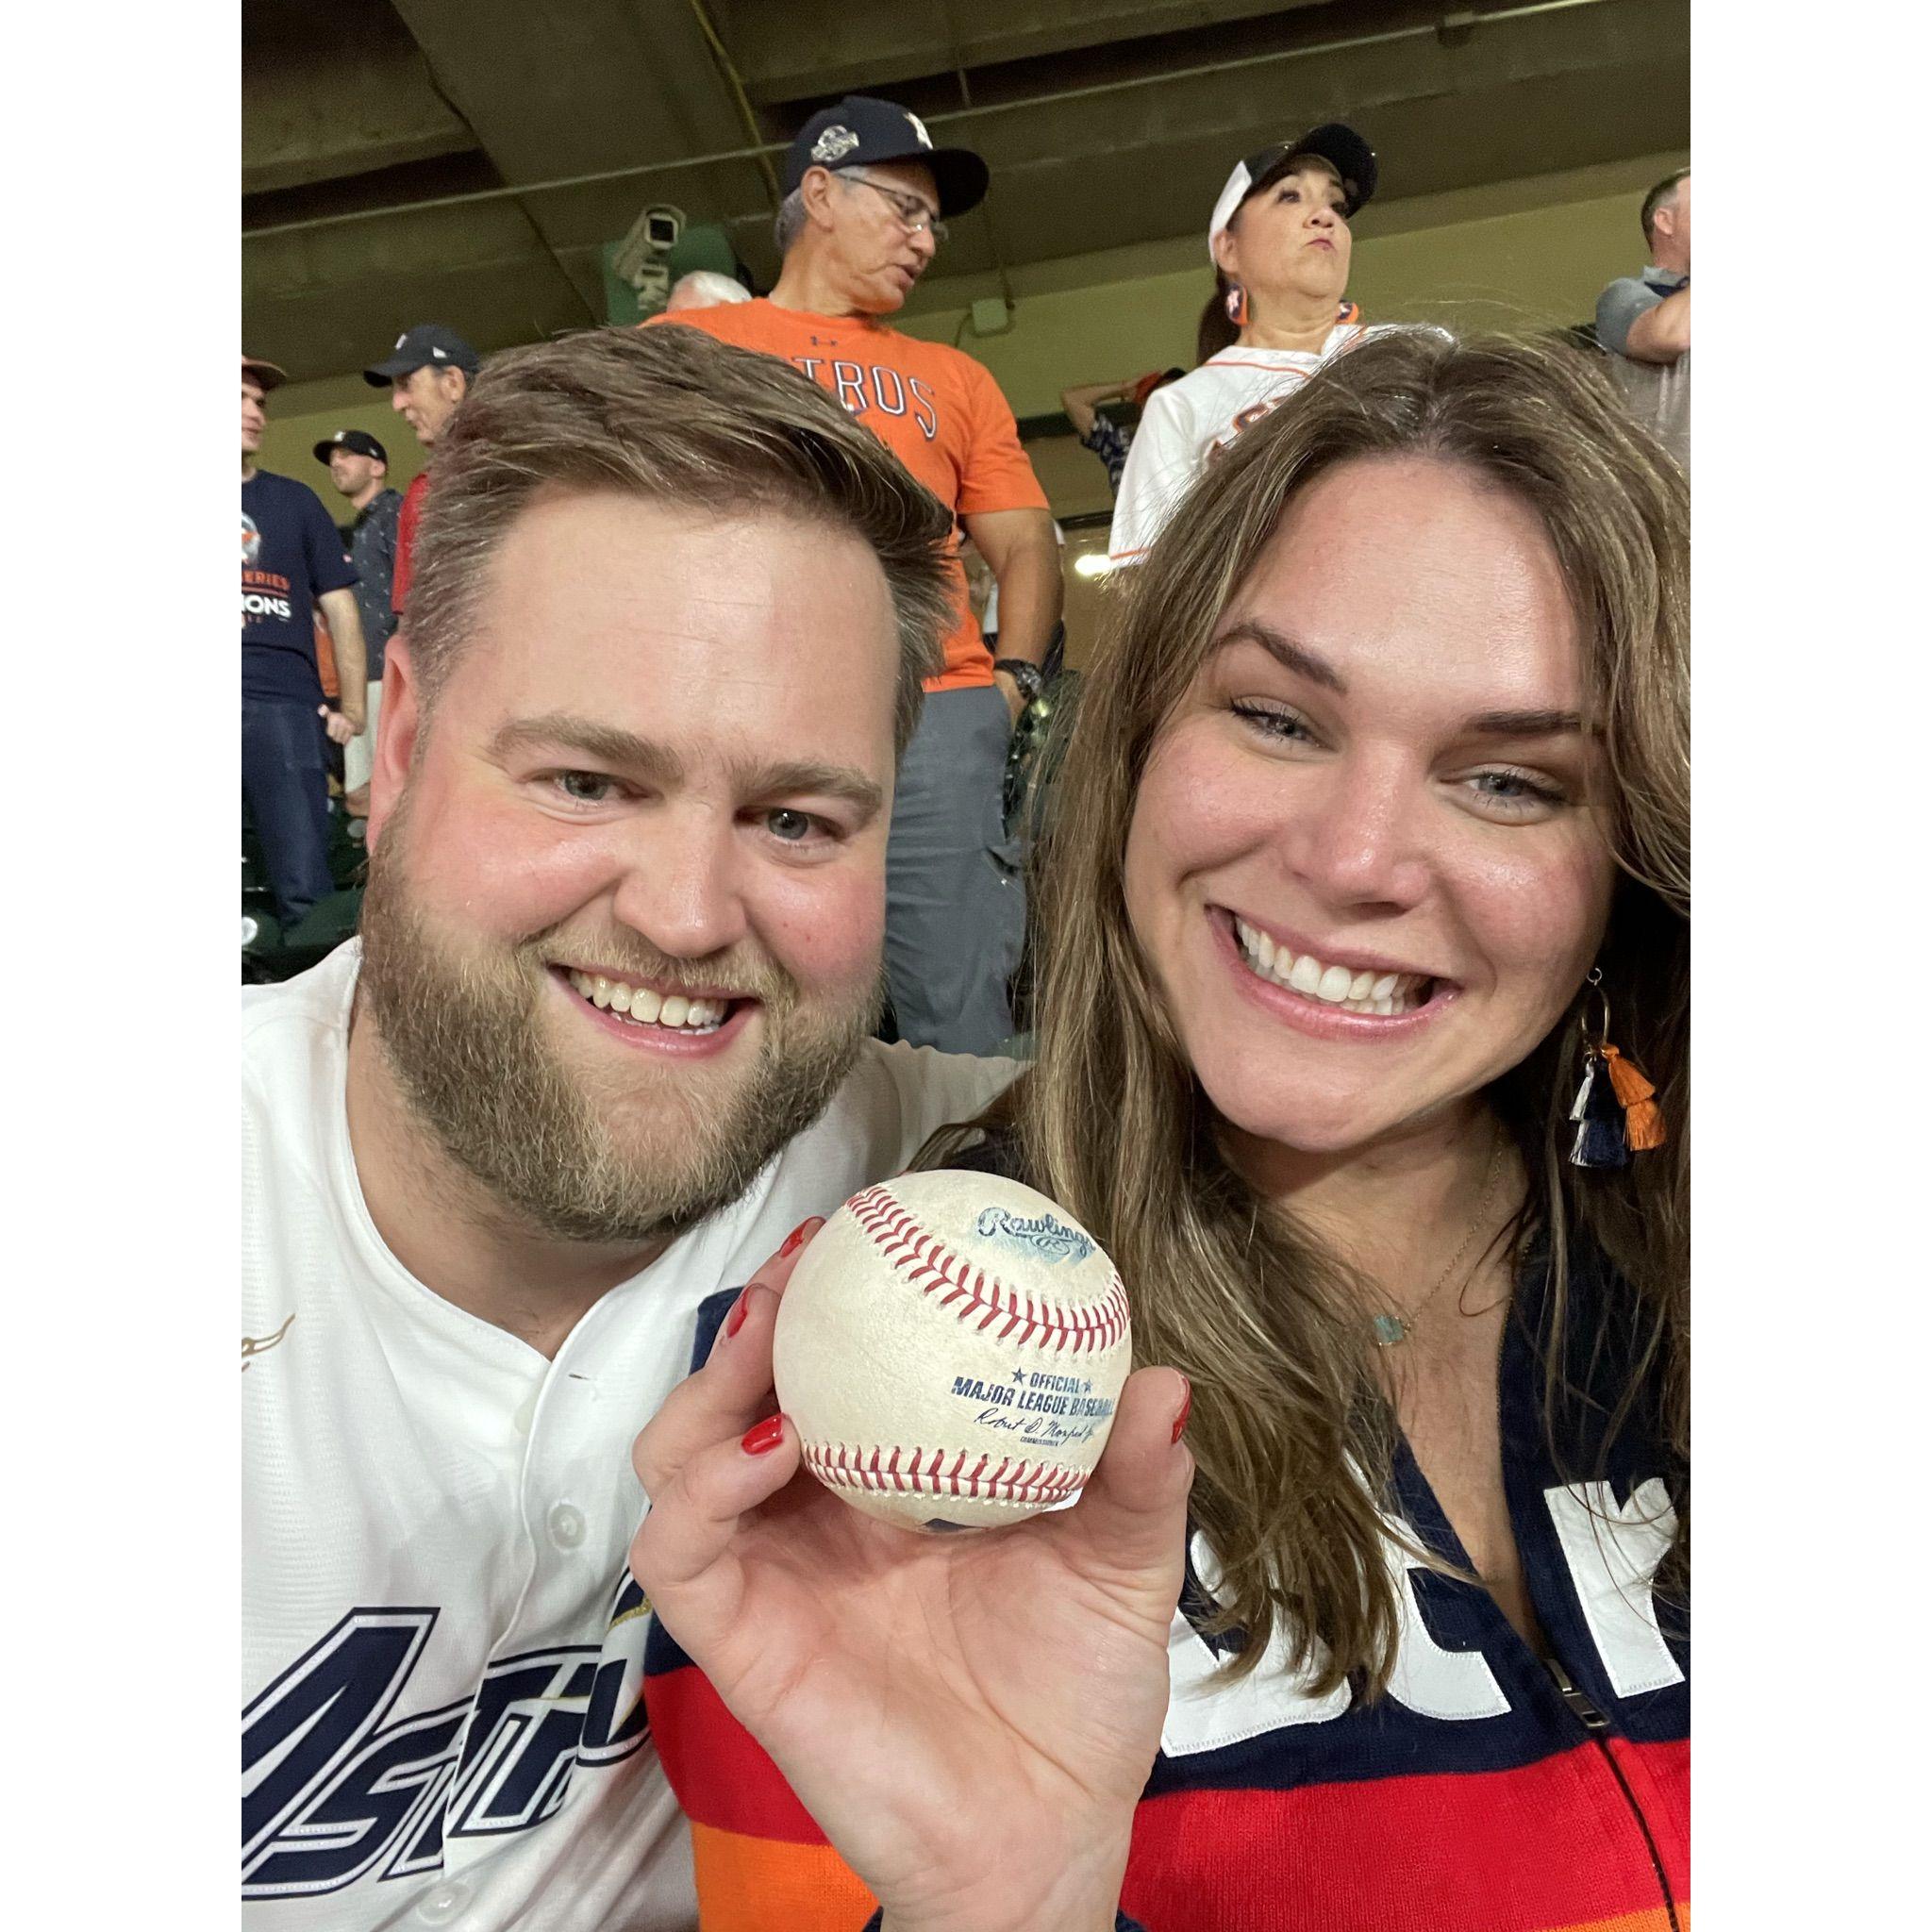 First baseball caught togther! April 2021, Houston TX